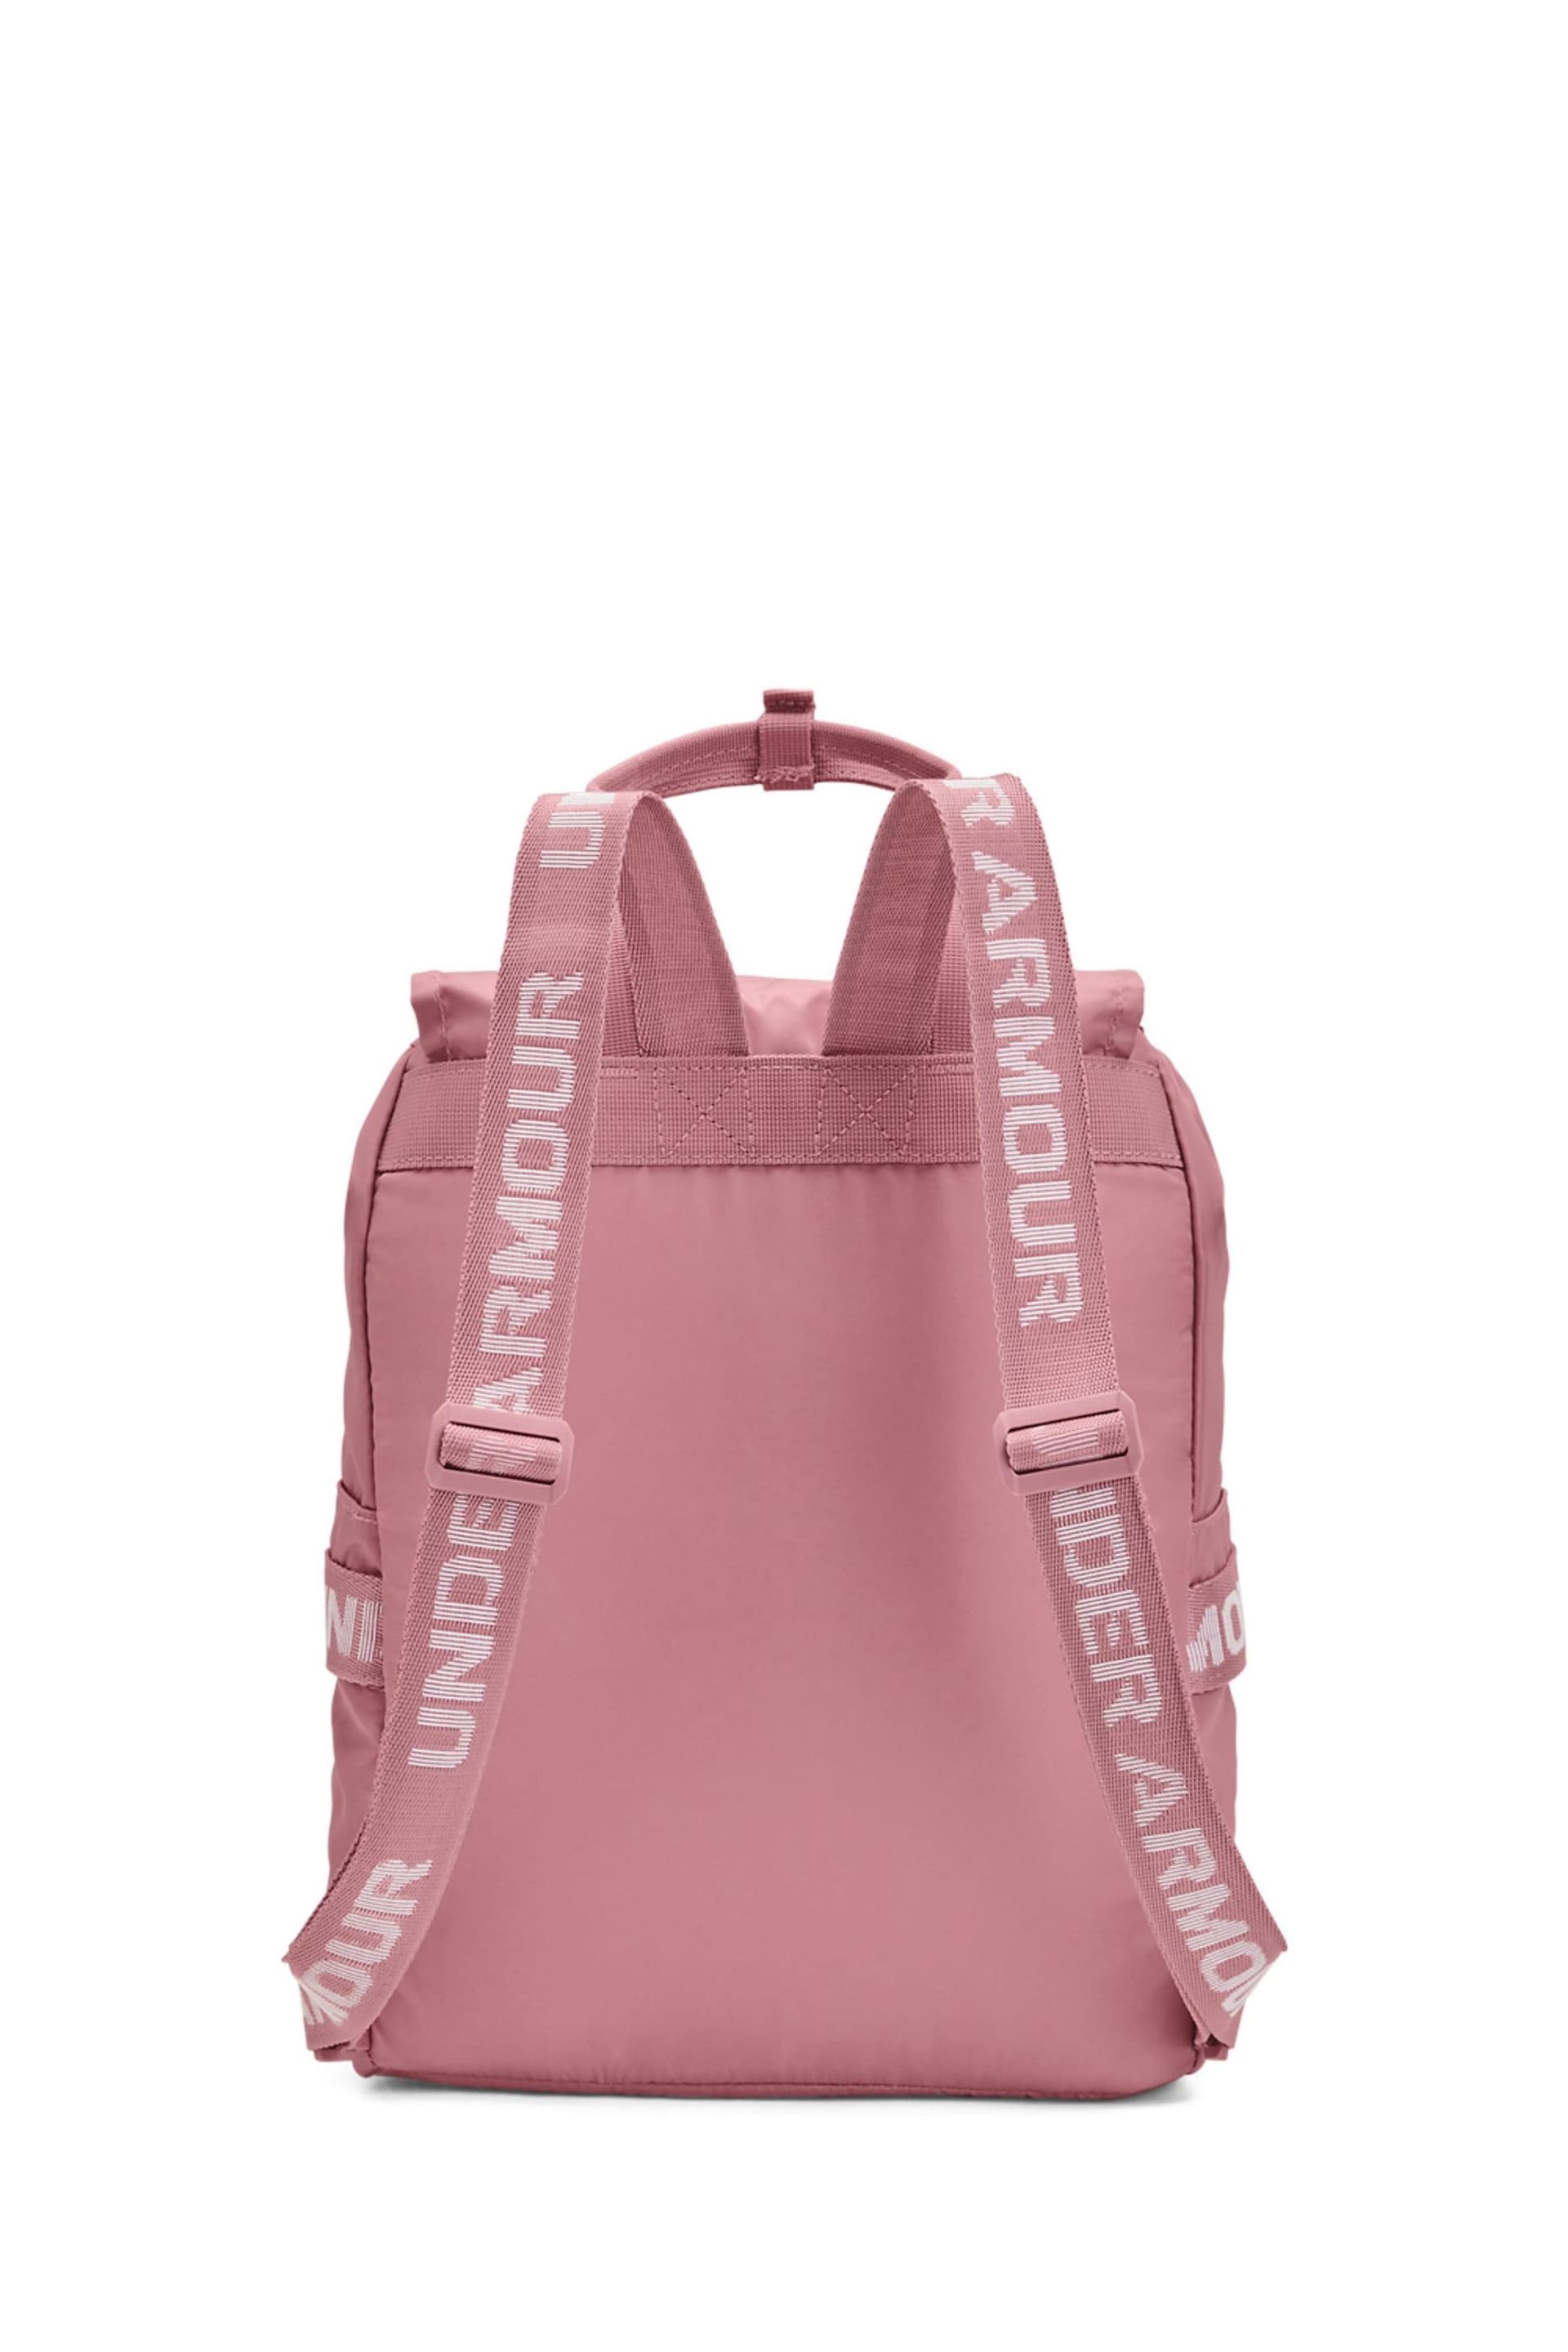 Under Armour Pink Favorite Backpack - Image 3 of 6